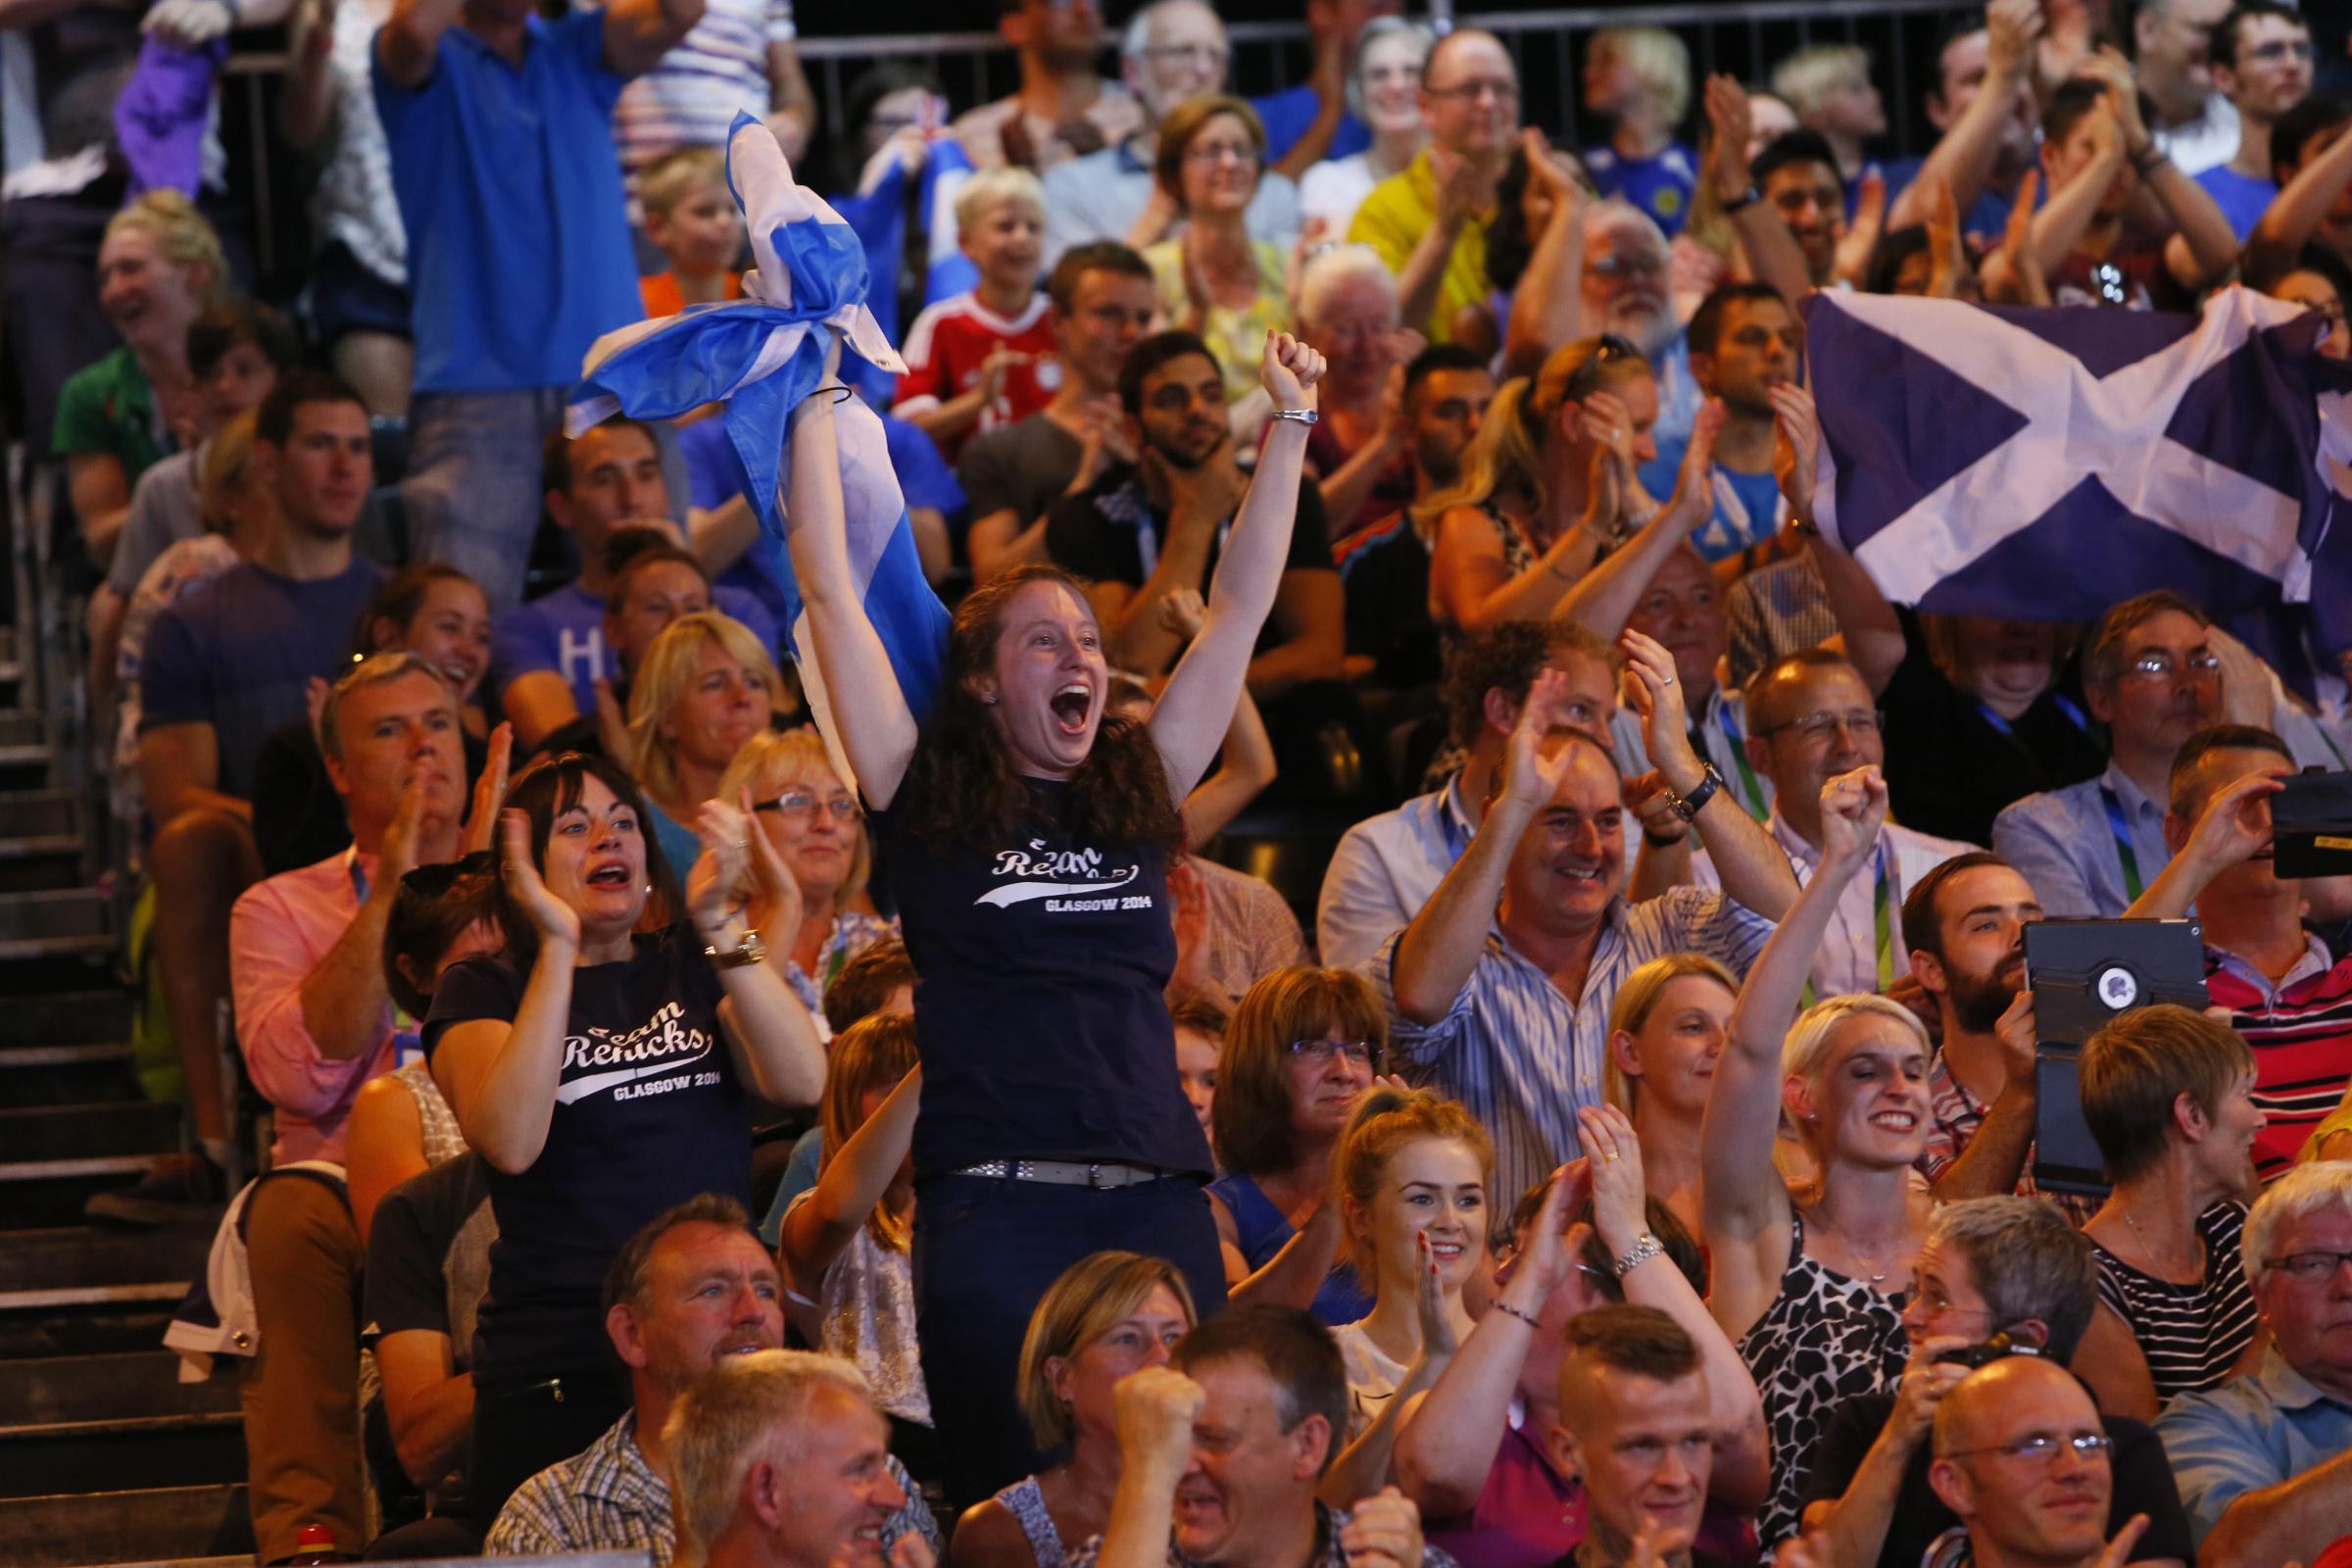 Glasgow 2014 Commonwealth games saw crowds enjoy an exhilarating experience. Photograph by Colin Mearns.